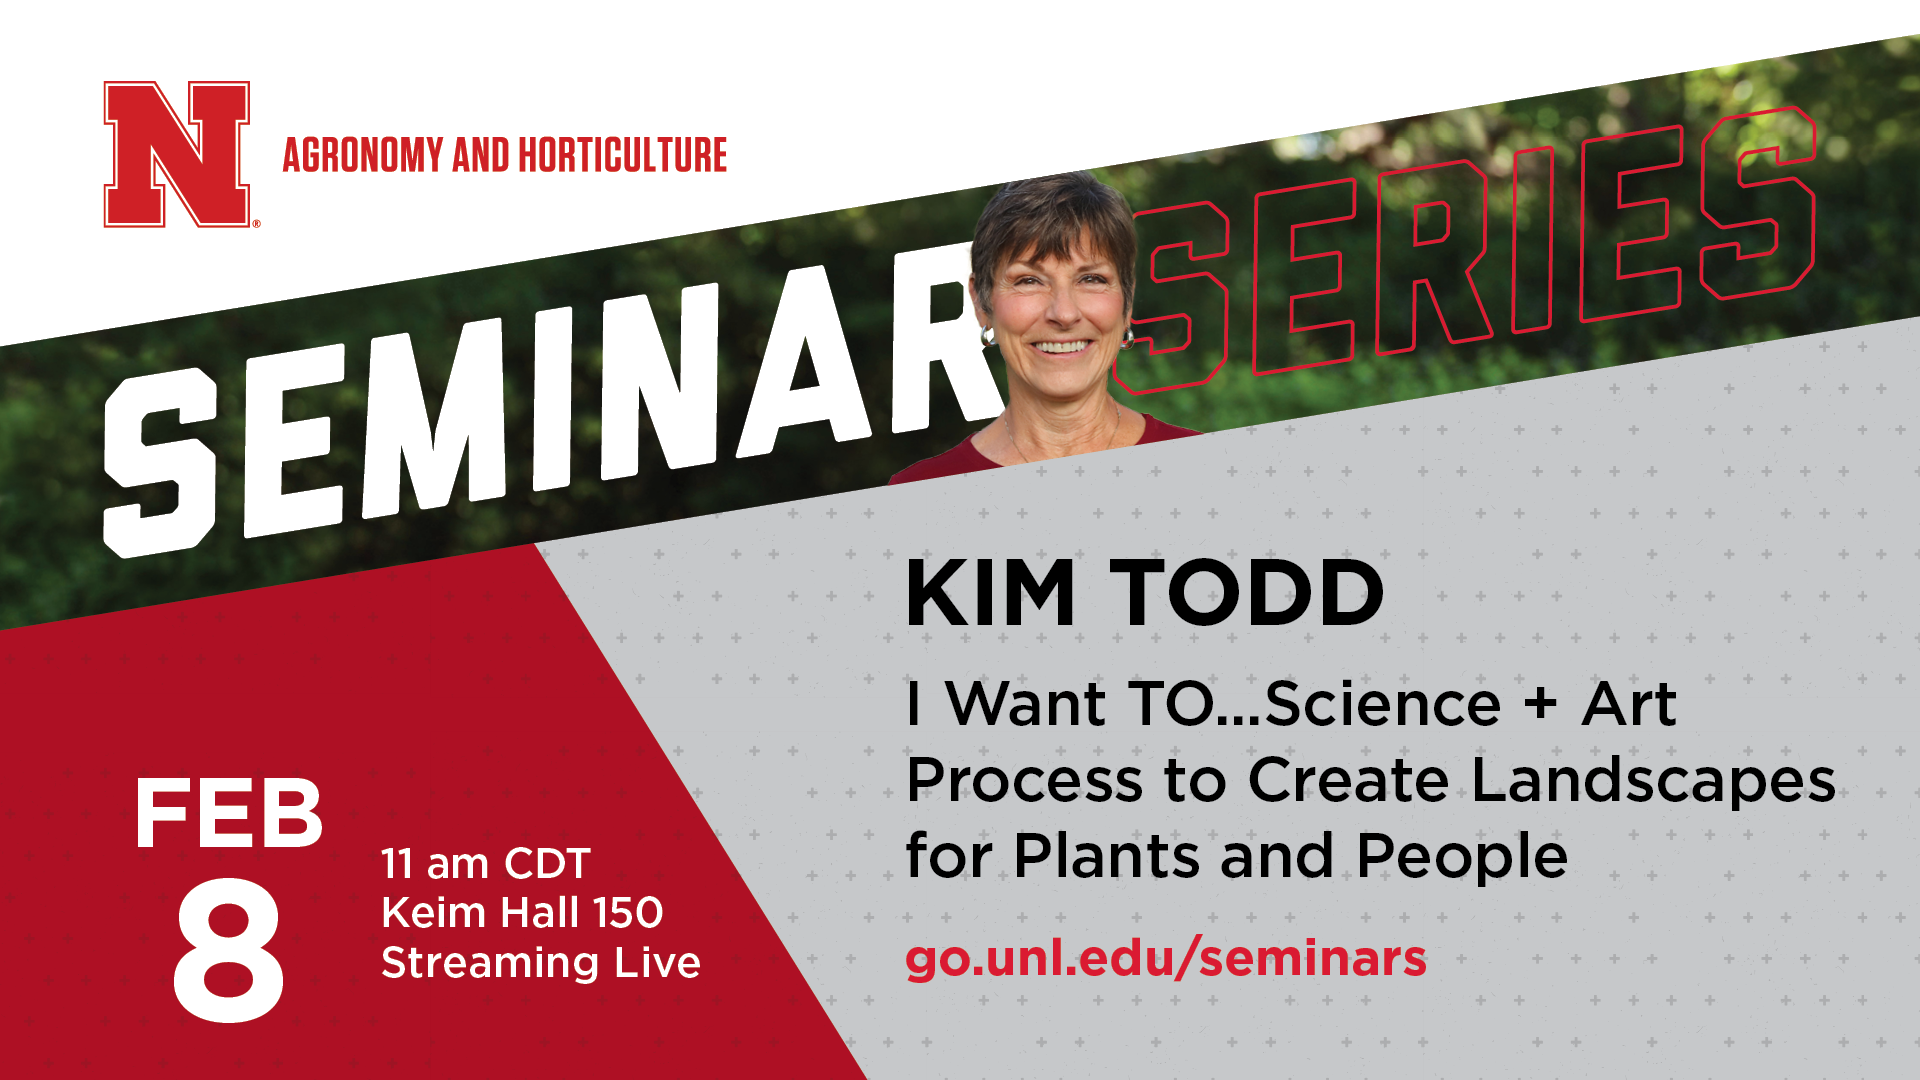 Kim Todd, professor and extension horticulture specialist, will present the next Agronomy and Horticulture seminar on Feb. 8.